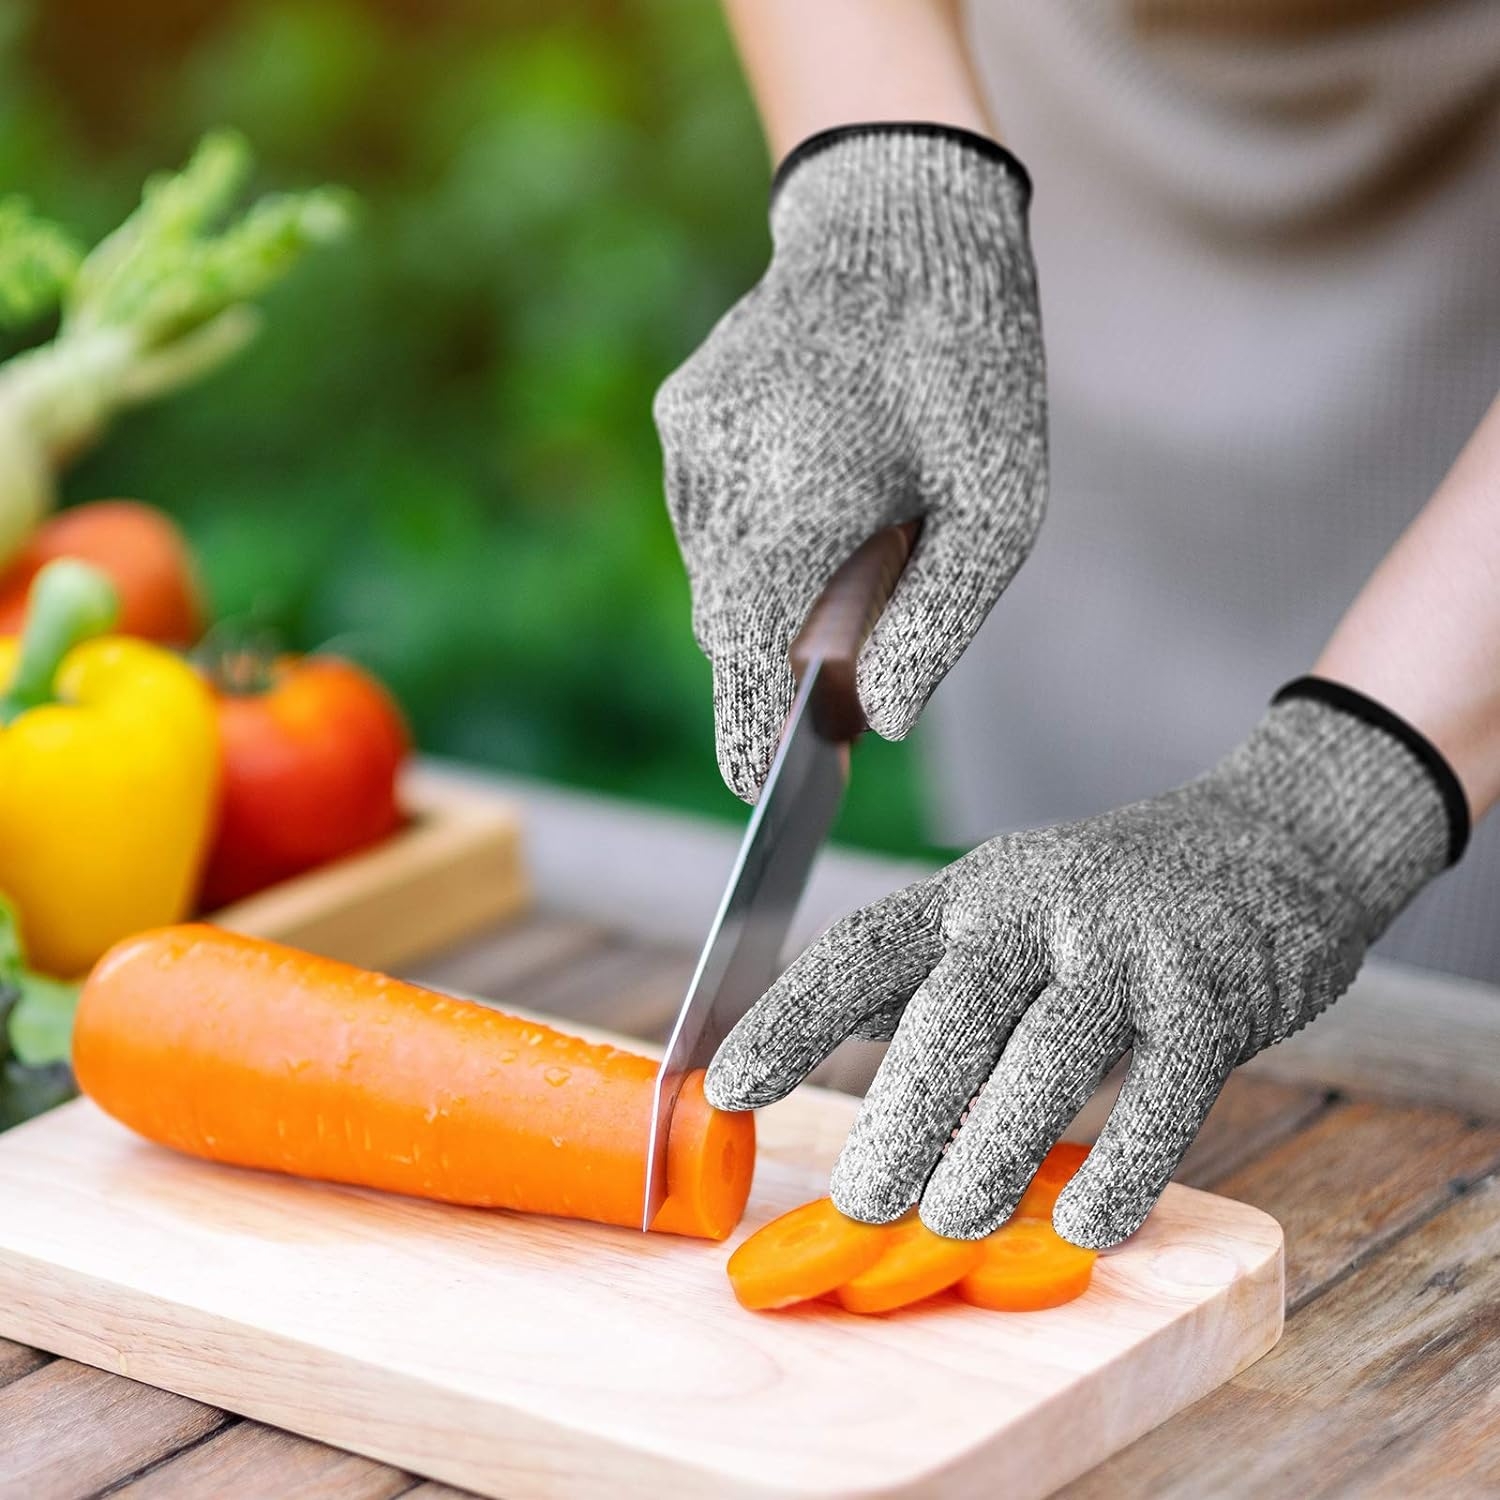 EVRIDWEAR Cut Resistant Gloves, Food Grade Level 5 Safety Protection Kitchen Cuts Gloves For cutting, Chopping, Fish Fillet, Mandolin Slicing and Yard-Work (Small, Gray)